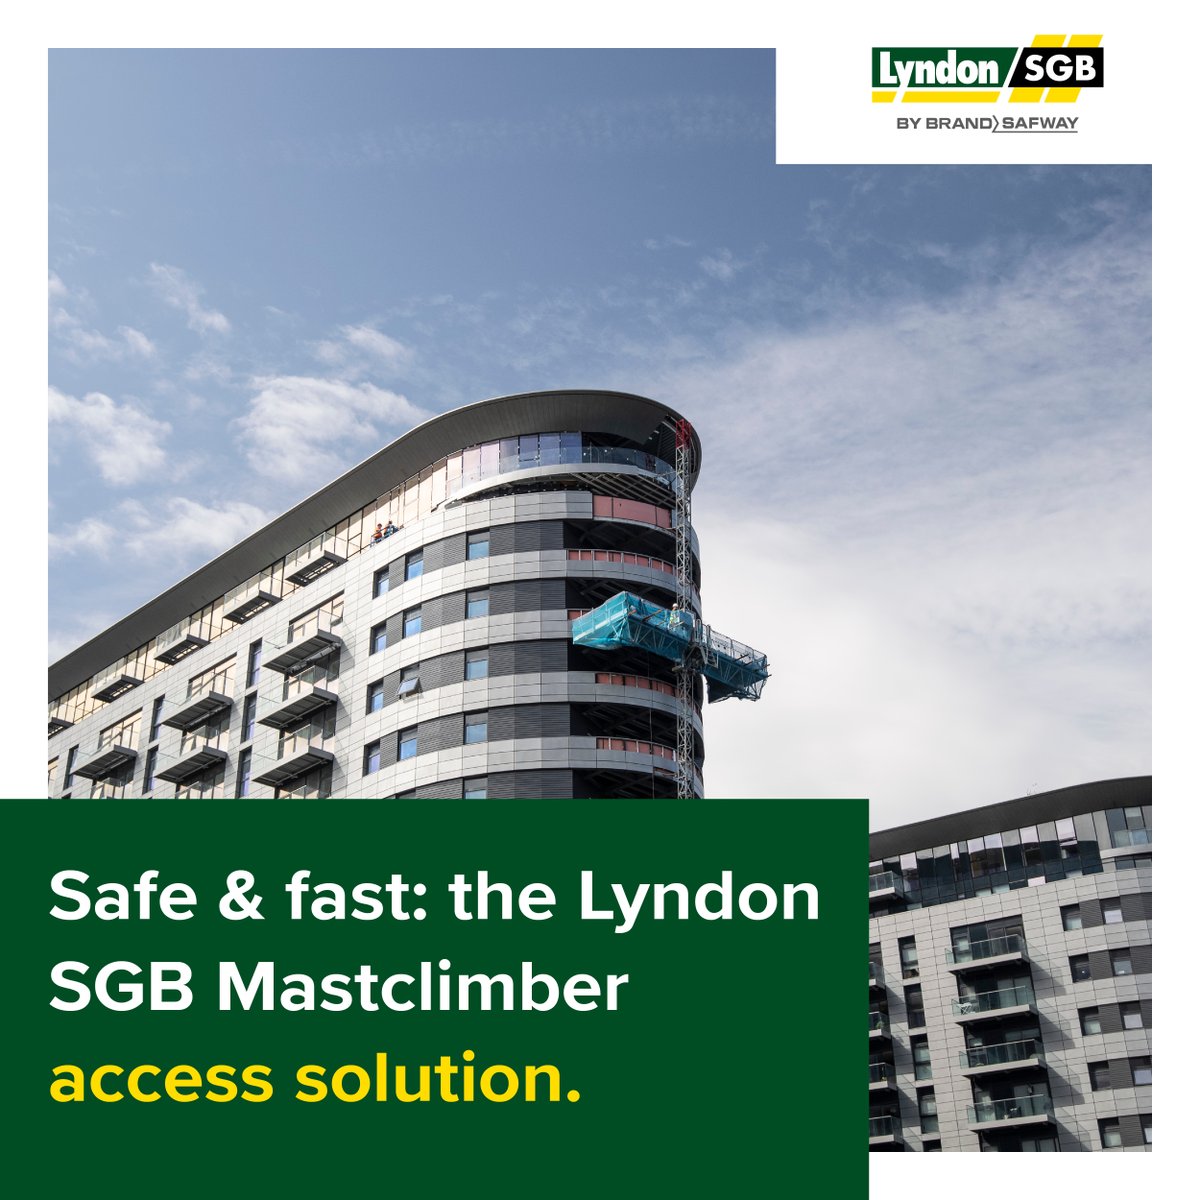 One of our fastest growing operations across the UK is our Mastclimber operation 📈 They offer specific advantages over access systems for projects of all types 👷🏻‍♂️ Reach out for ℹ️ info@lyndon-sgb.co.uk #LyndonSGB #WeAreOne #MoreSafety #MoreProductivity #AtWorkForYou